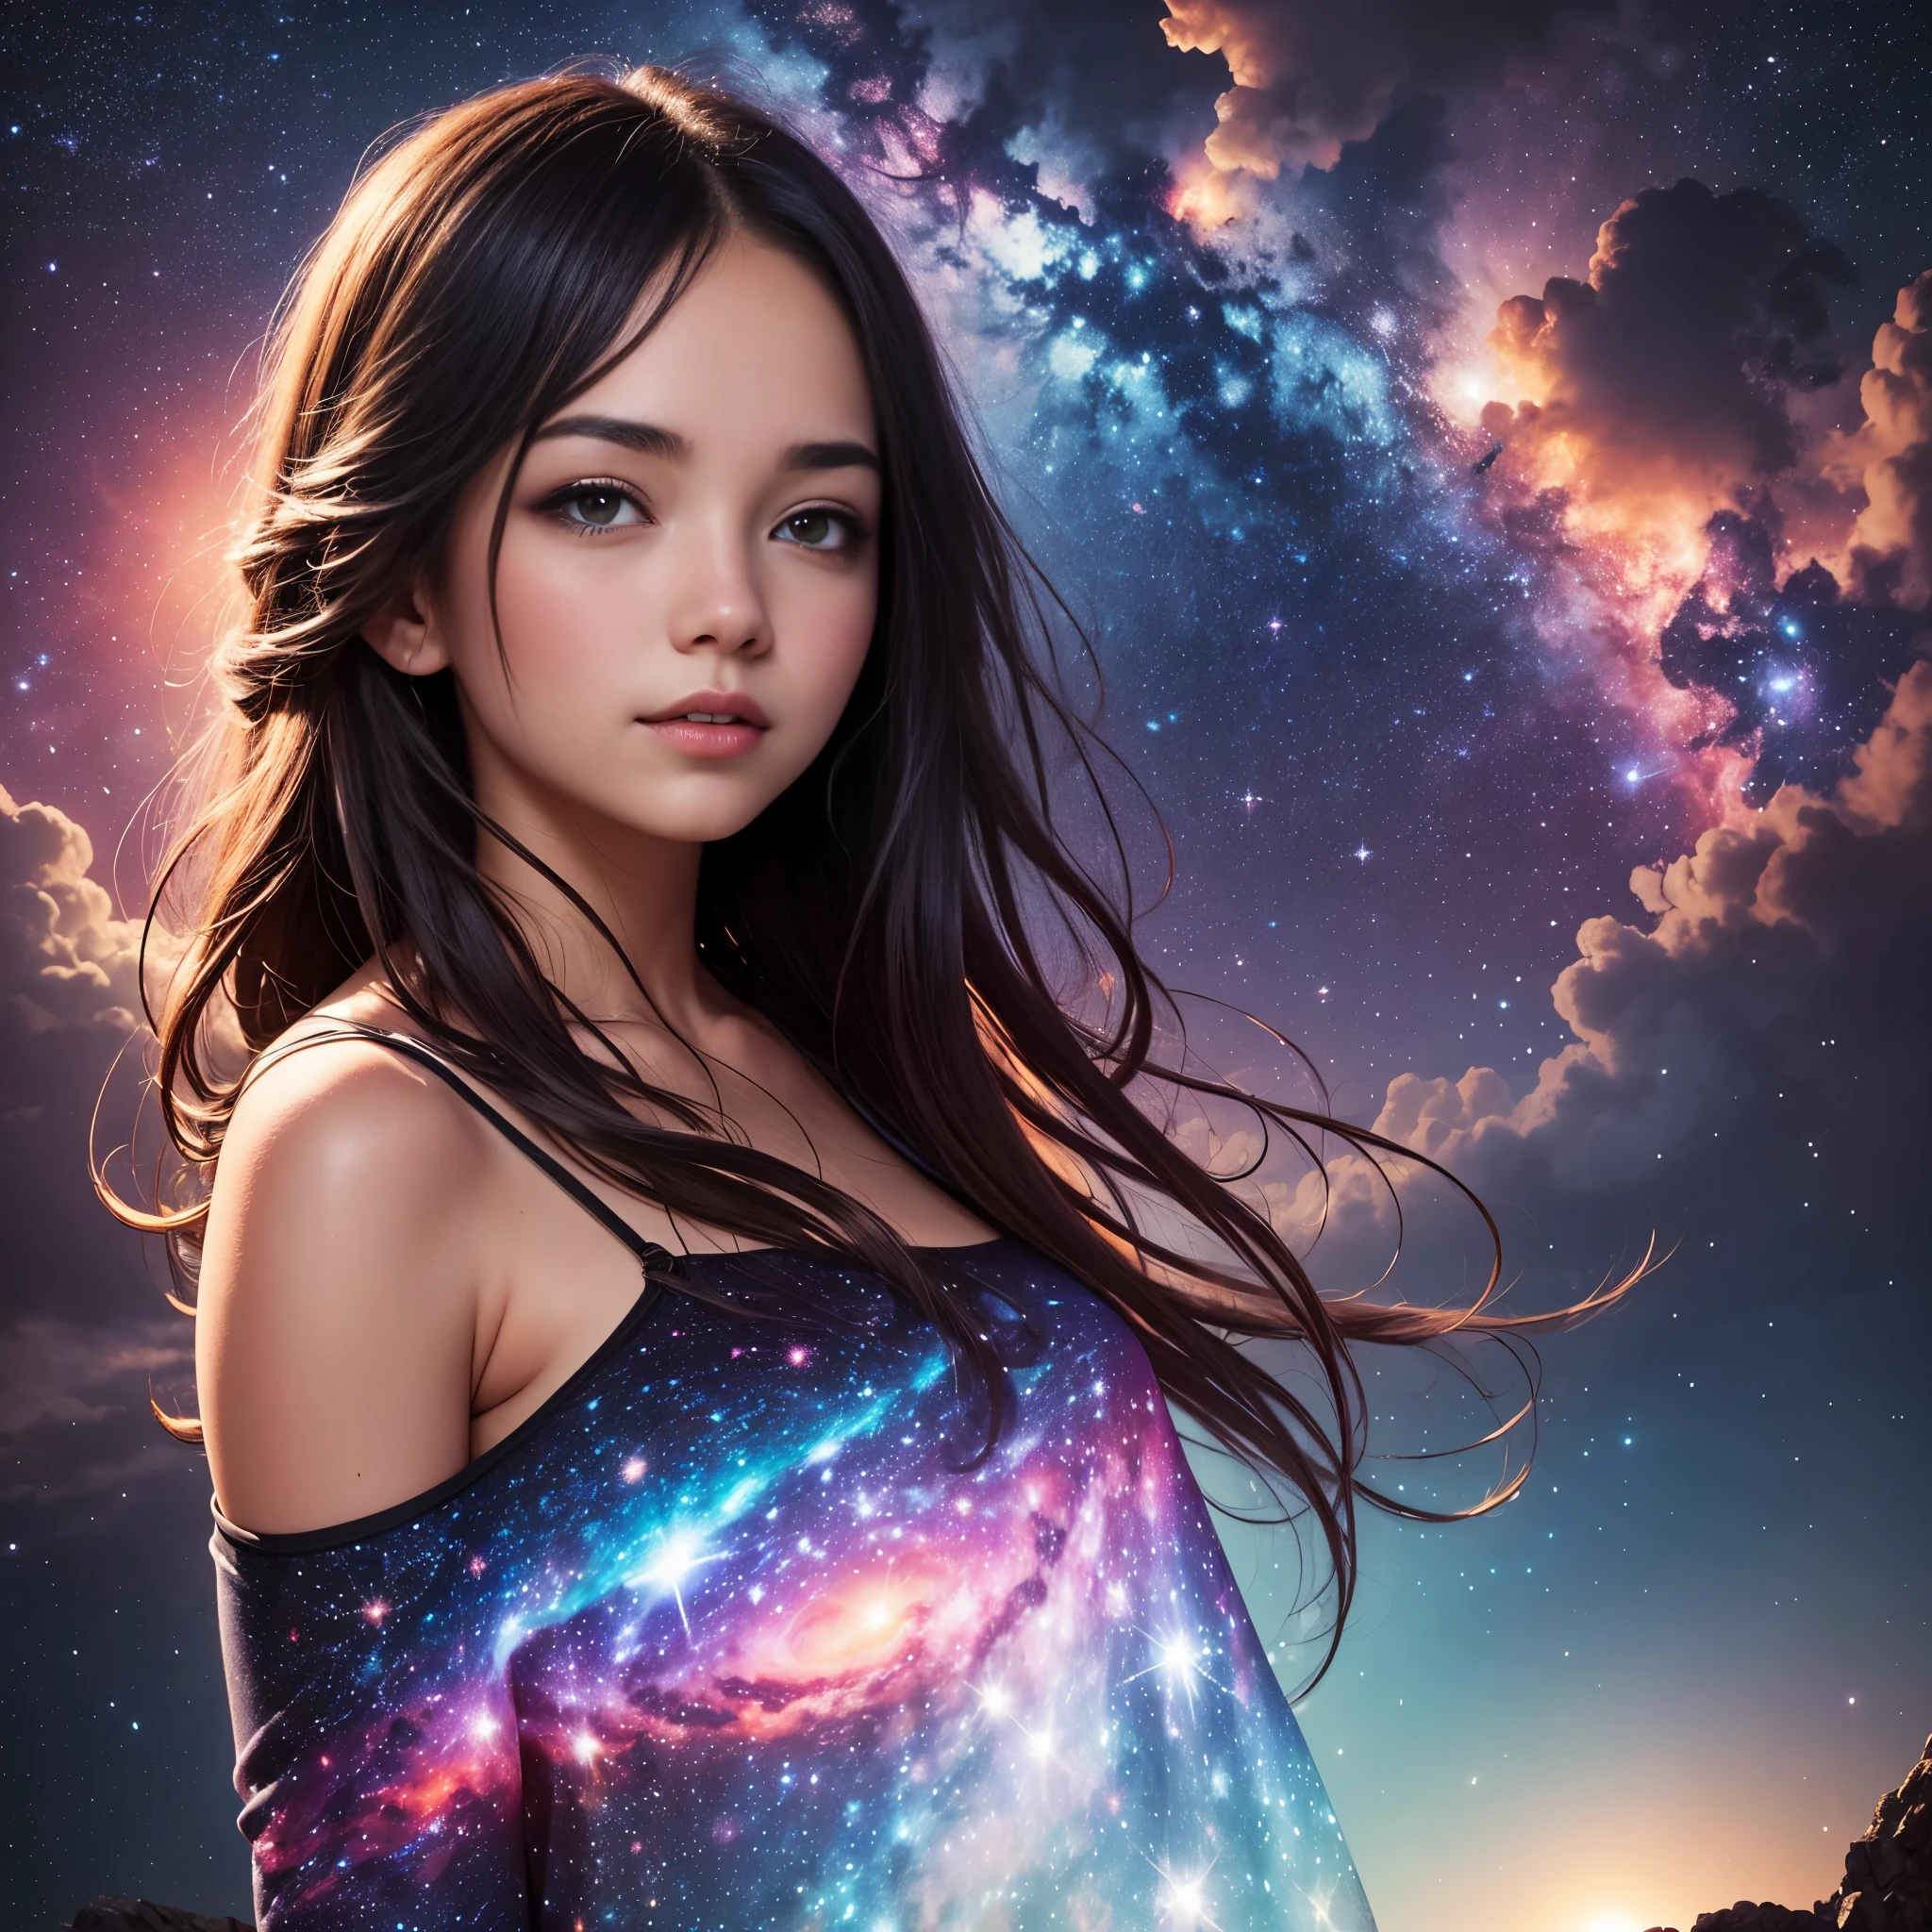 High detail, super detail, super high resolution, girl enjoying her time in the dream galaxy, surrounded by stars, warm light sprinkled on her, background is starry sky with colorful galaxies and galaxy clouds, stars flying around her, delicate face, adding playful atmosphere , 